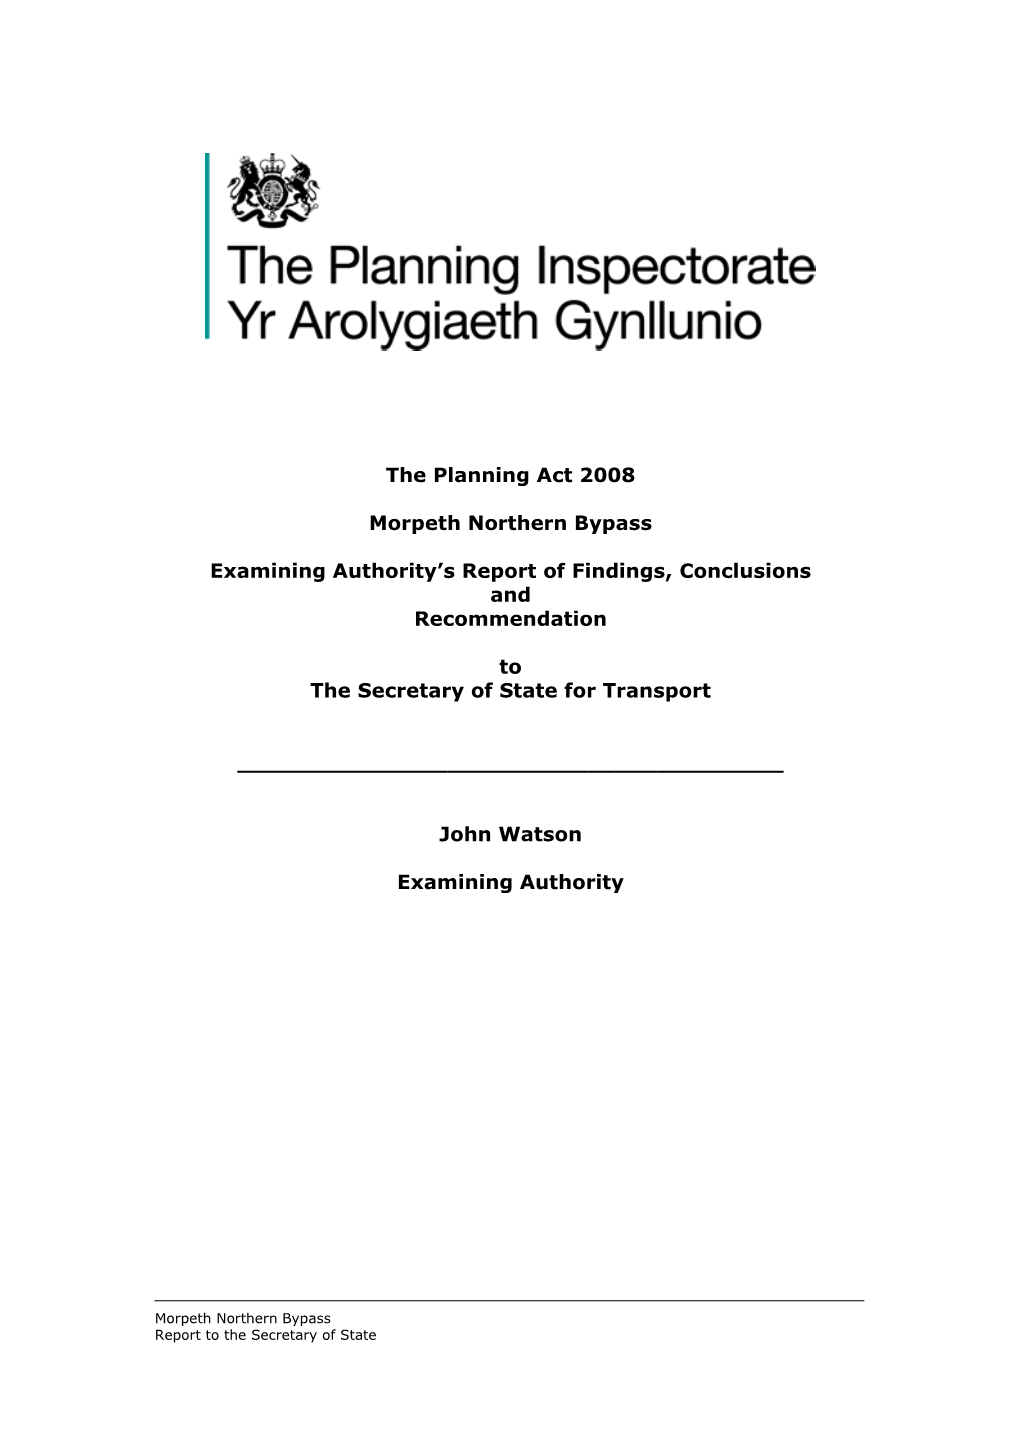 The Planning Act 2008 Morpeth Northern Bypass Examining